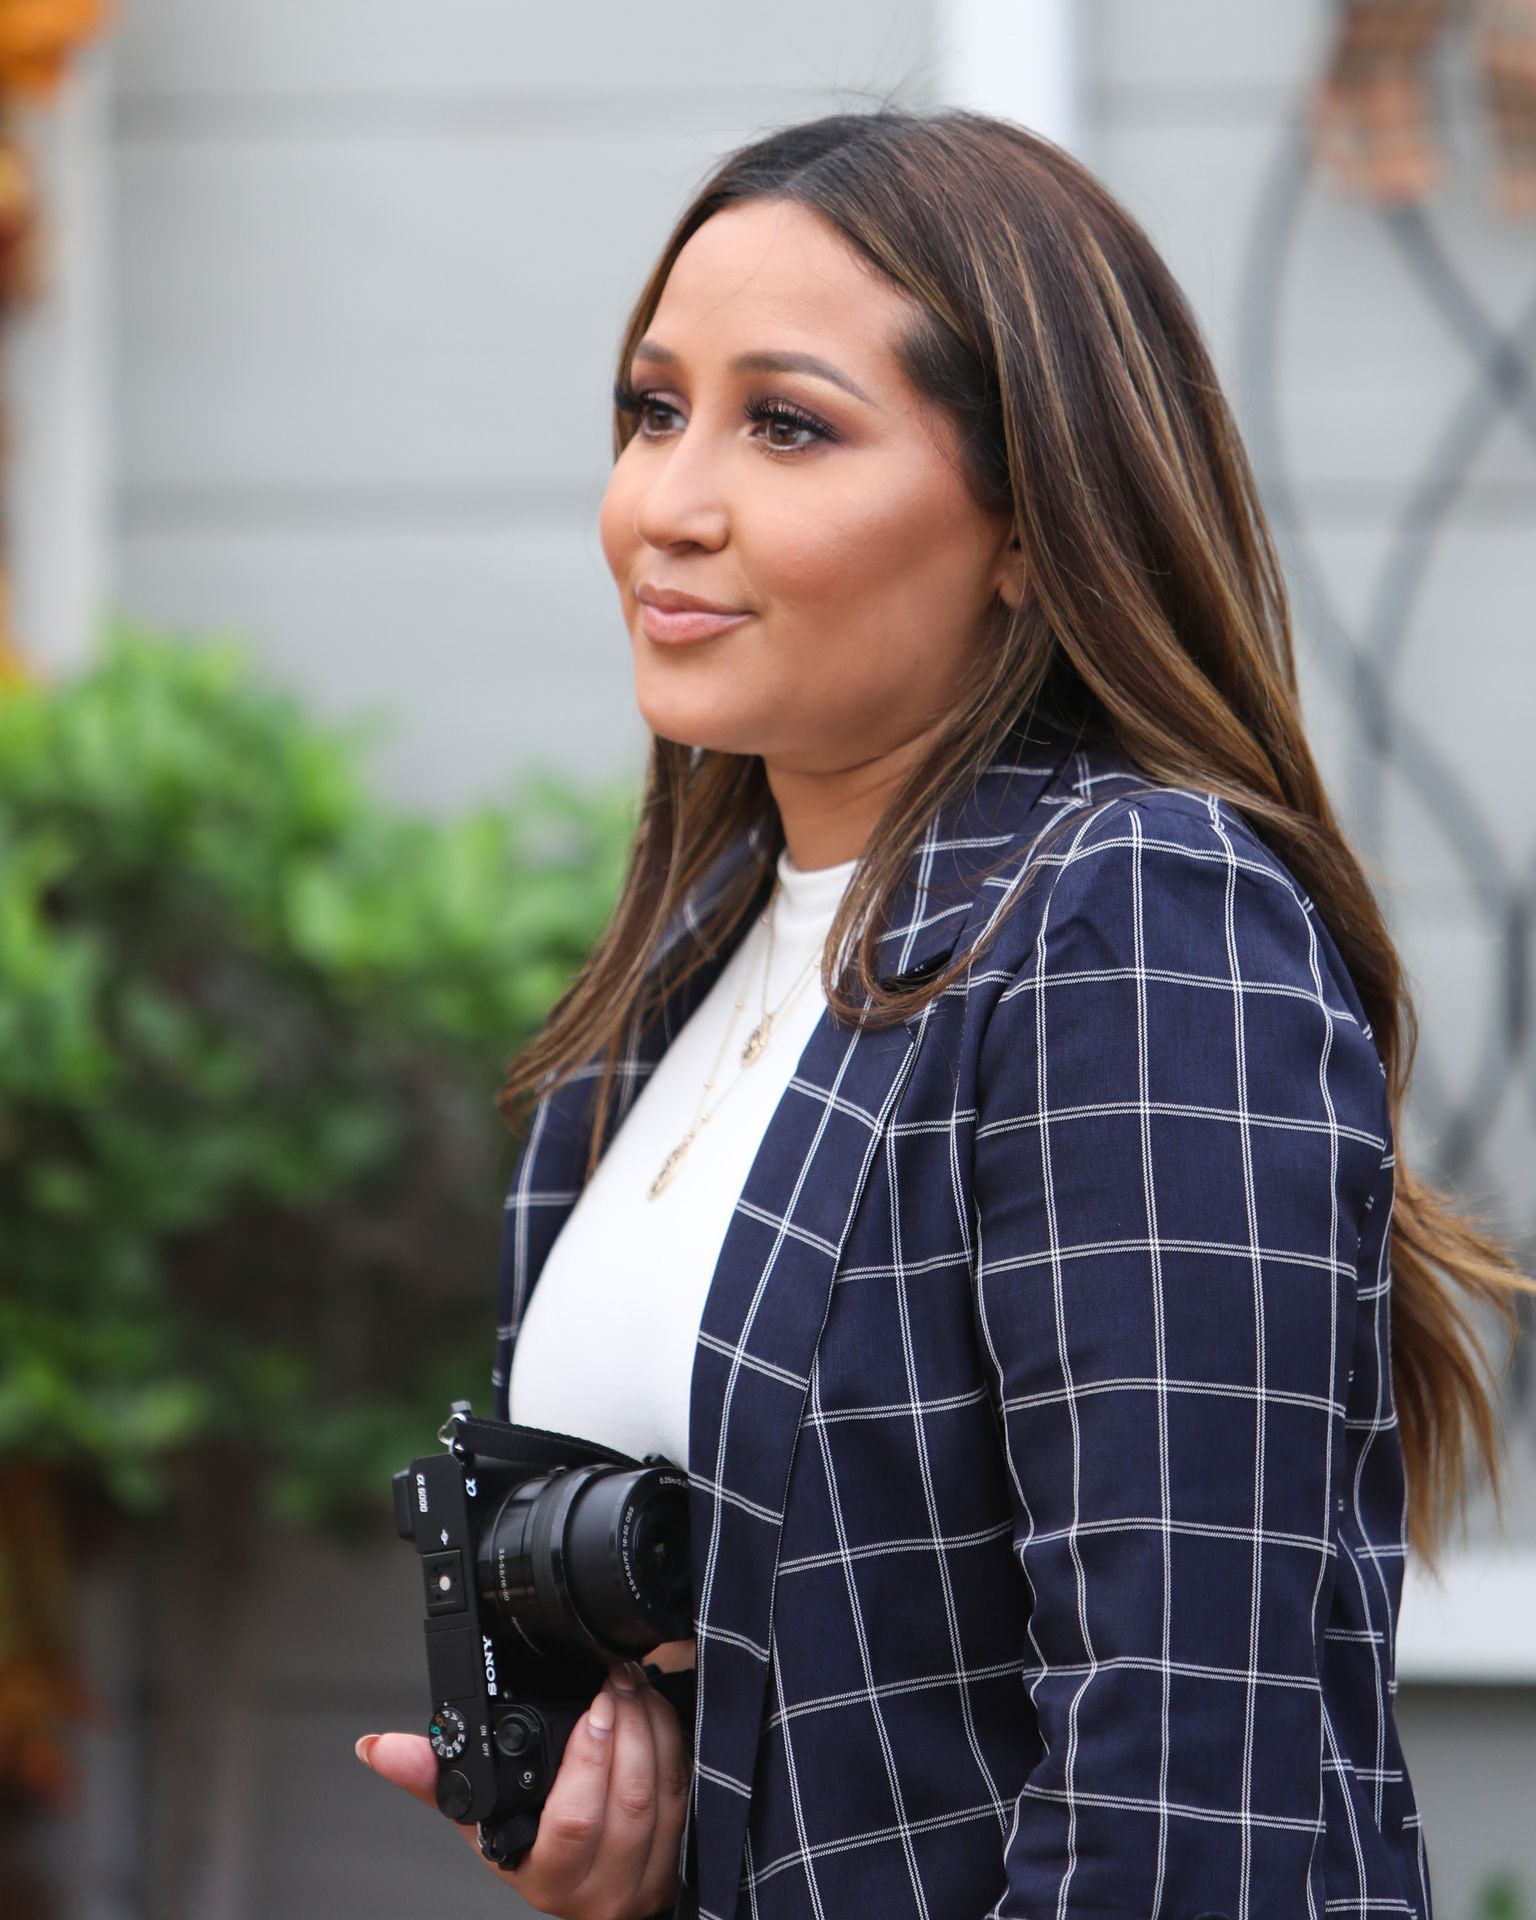 Adrienne Houghton visited Hallmark's "Home & Family" at Universal Studios Hollywood on October 5, 2018 in Universal City, California. | Photo: Getty Images